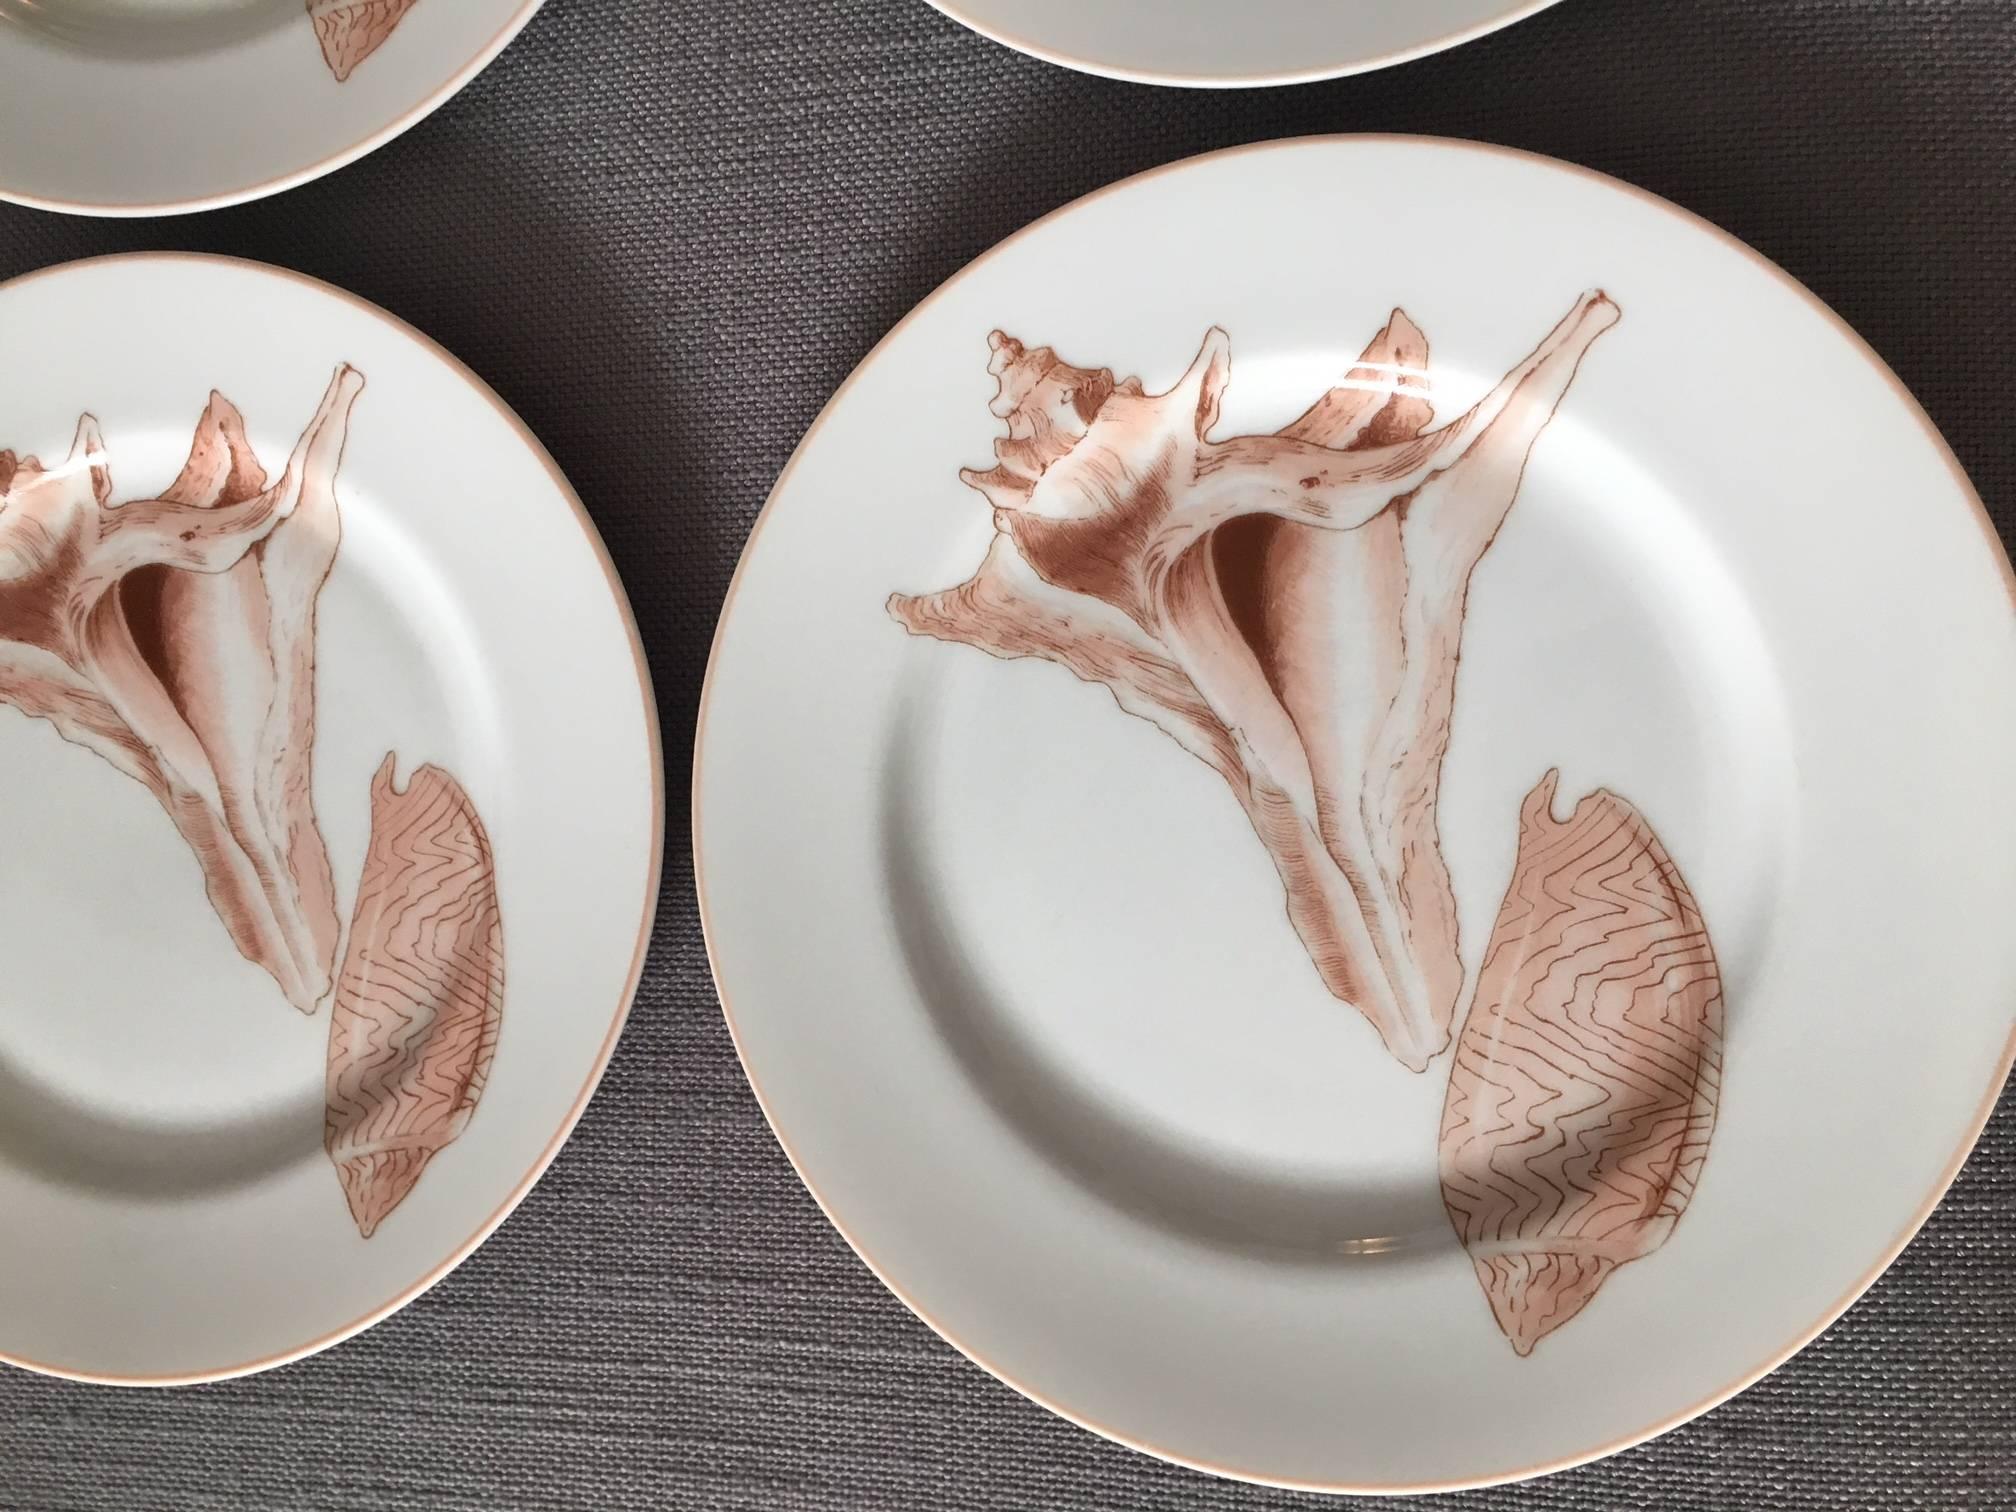 Wonderful set of four vintage 1976 salad plates by Fitz & Floyd in the Coquille pattern decorated with pale pink conch seashells on a white ground. Each measures 7.5" round x 1.25" height.